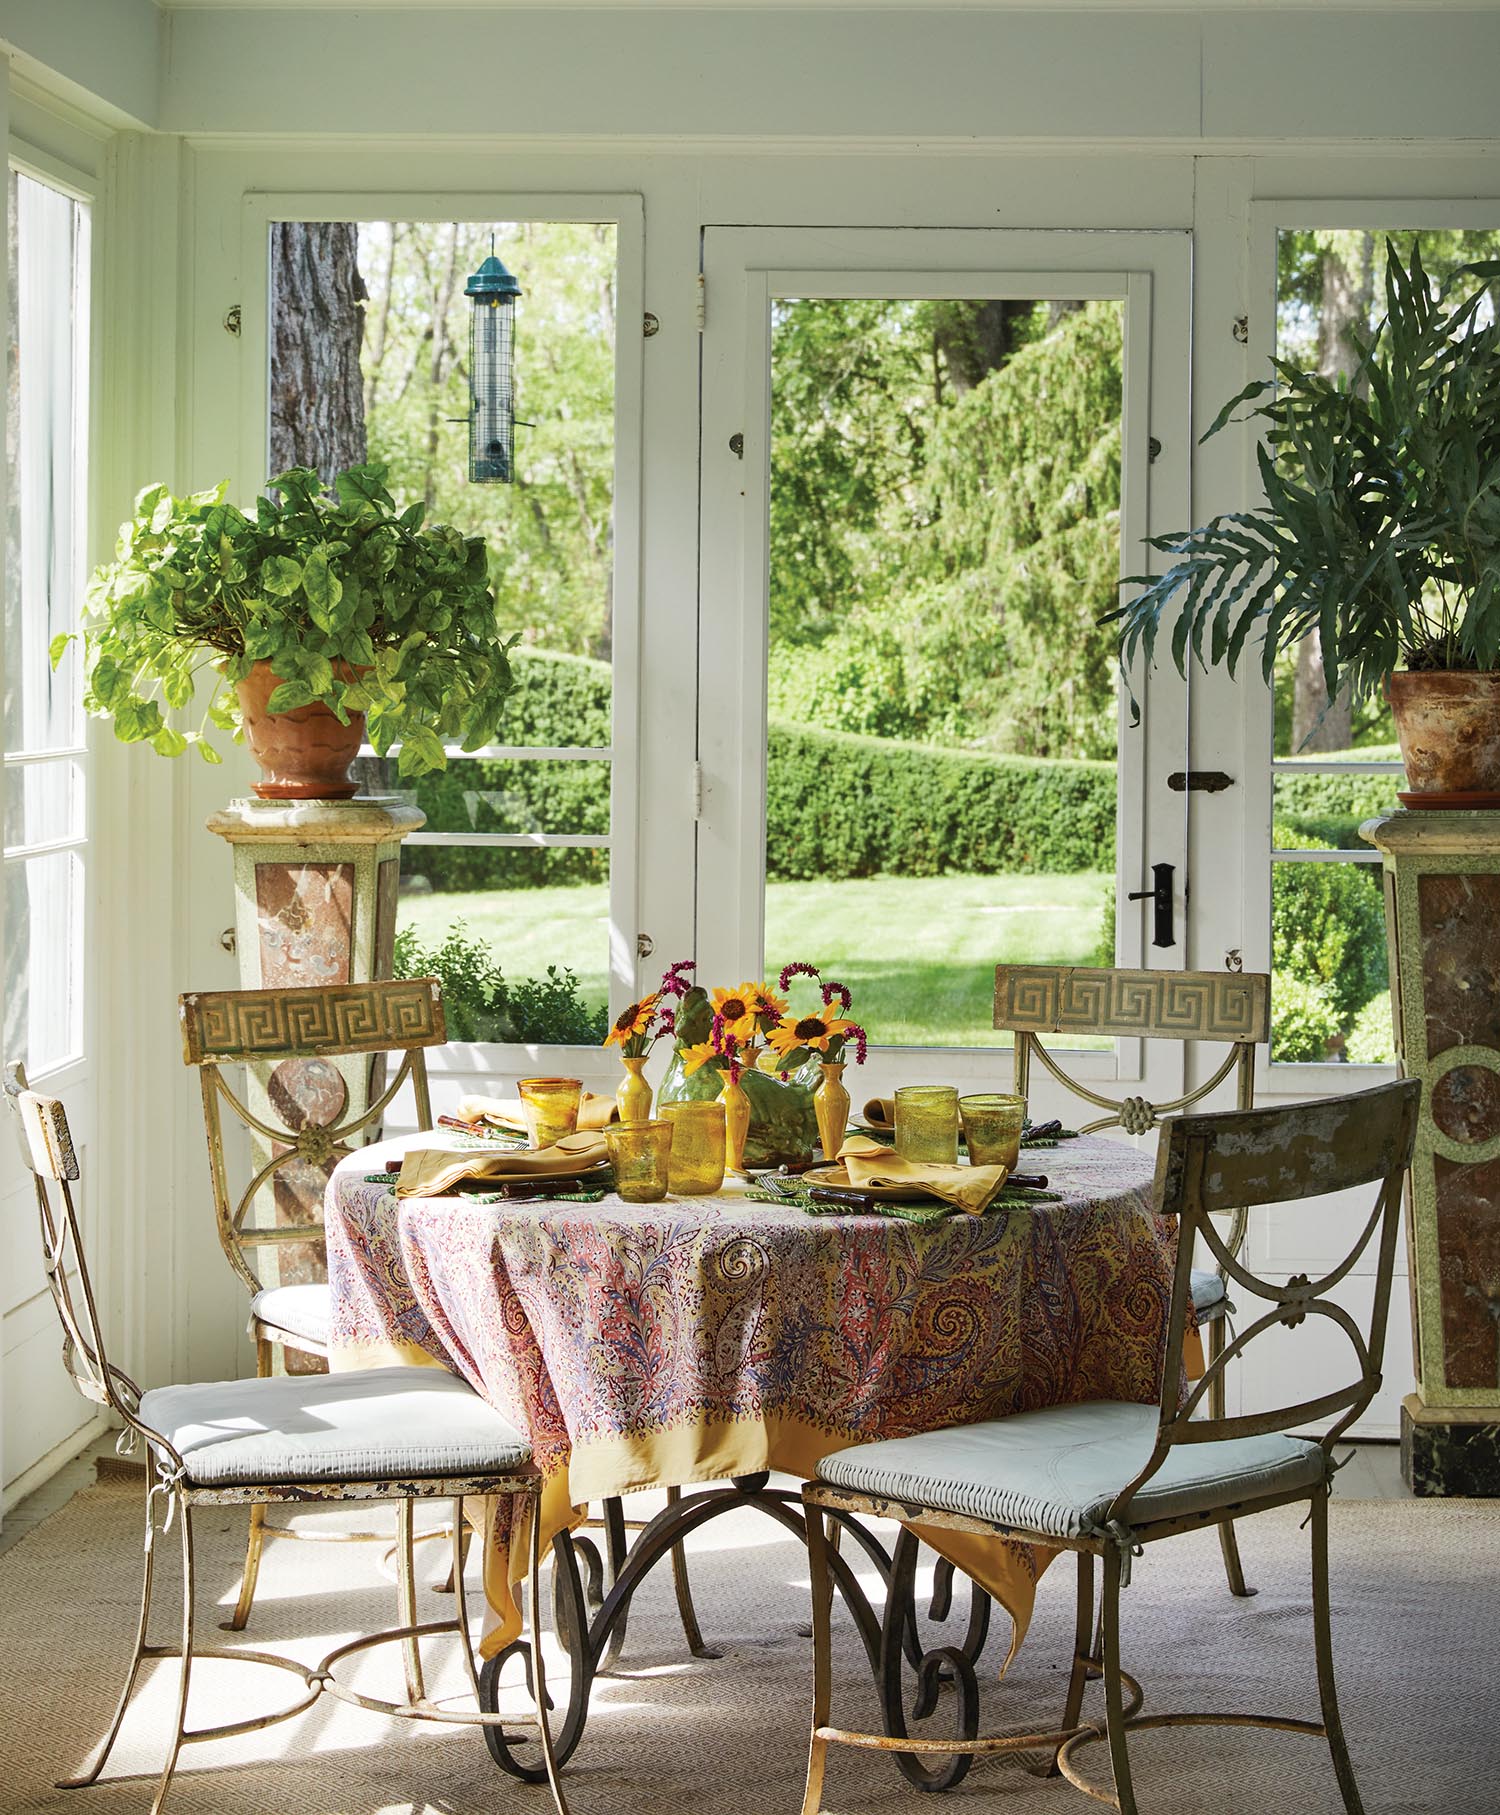 A table is set in a sunroom with a pink tablecloth and sunflowers.